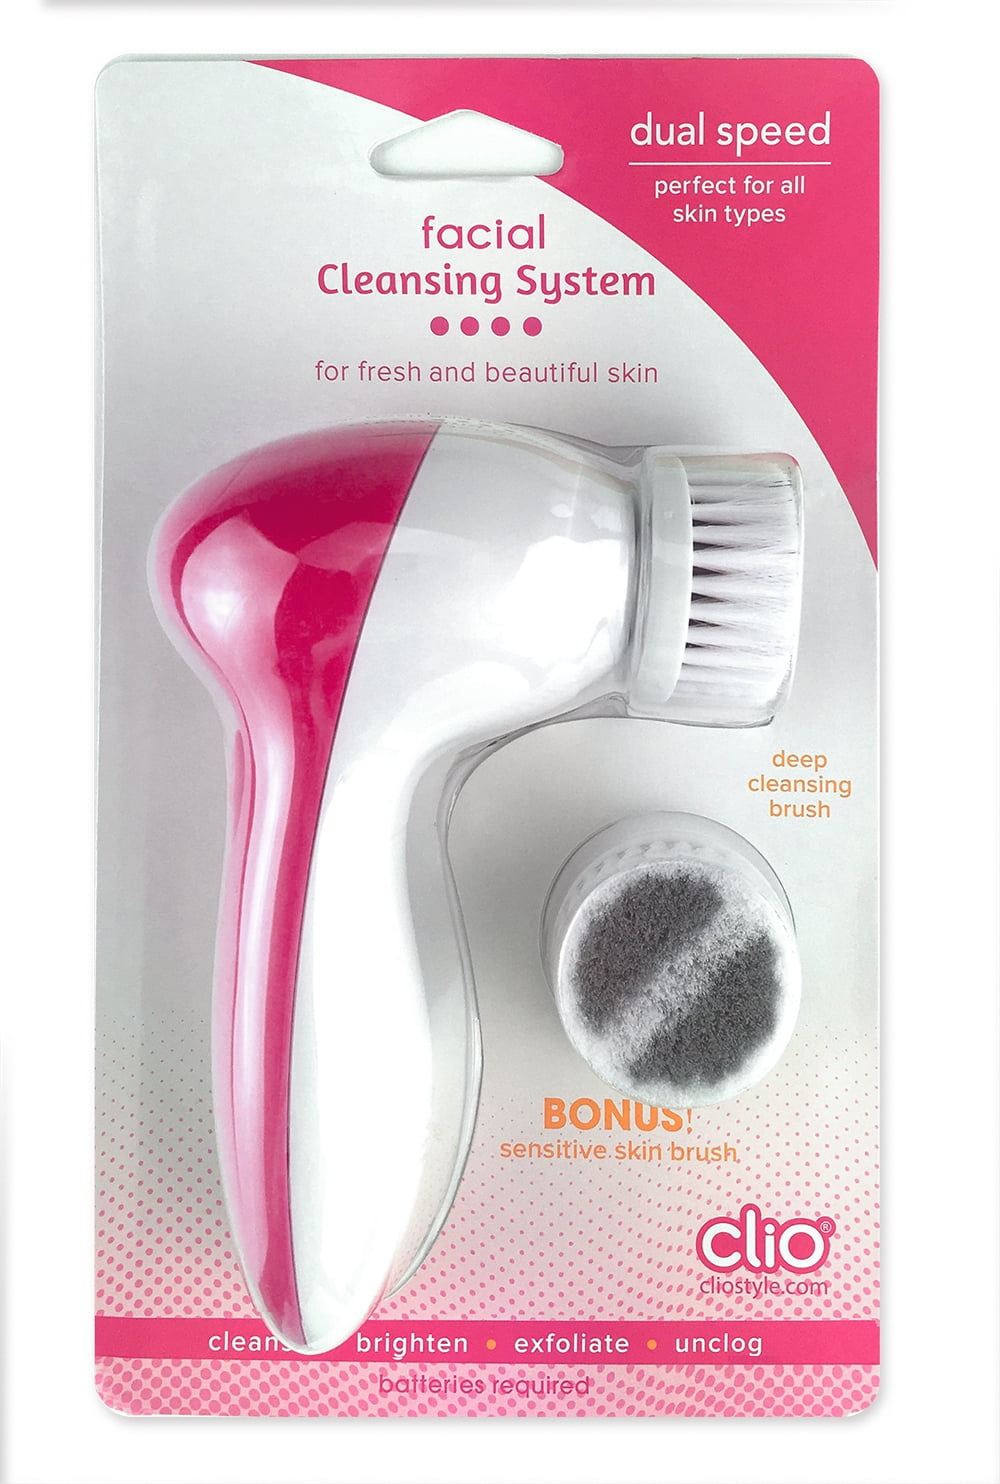 Clio Facial Cleansing System, Pink, Water Resistant, Facial Cleansing Brushes